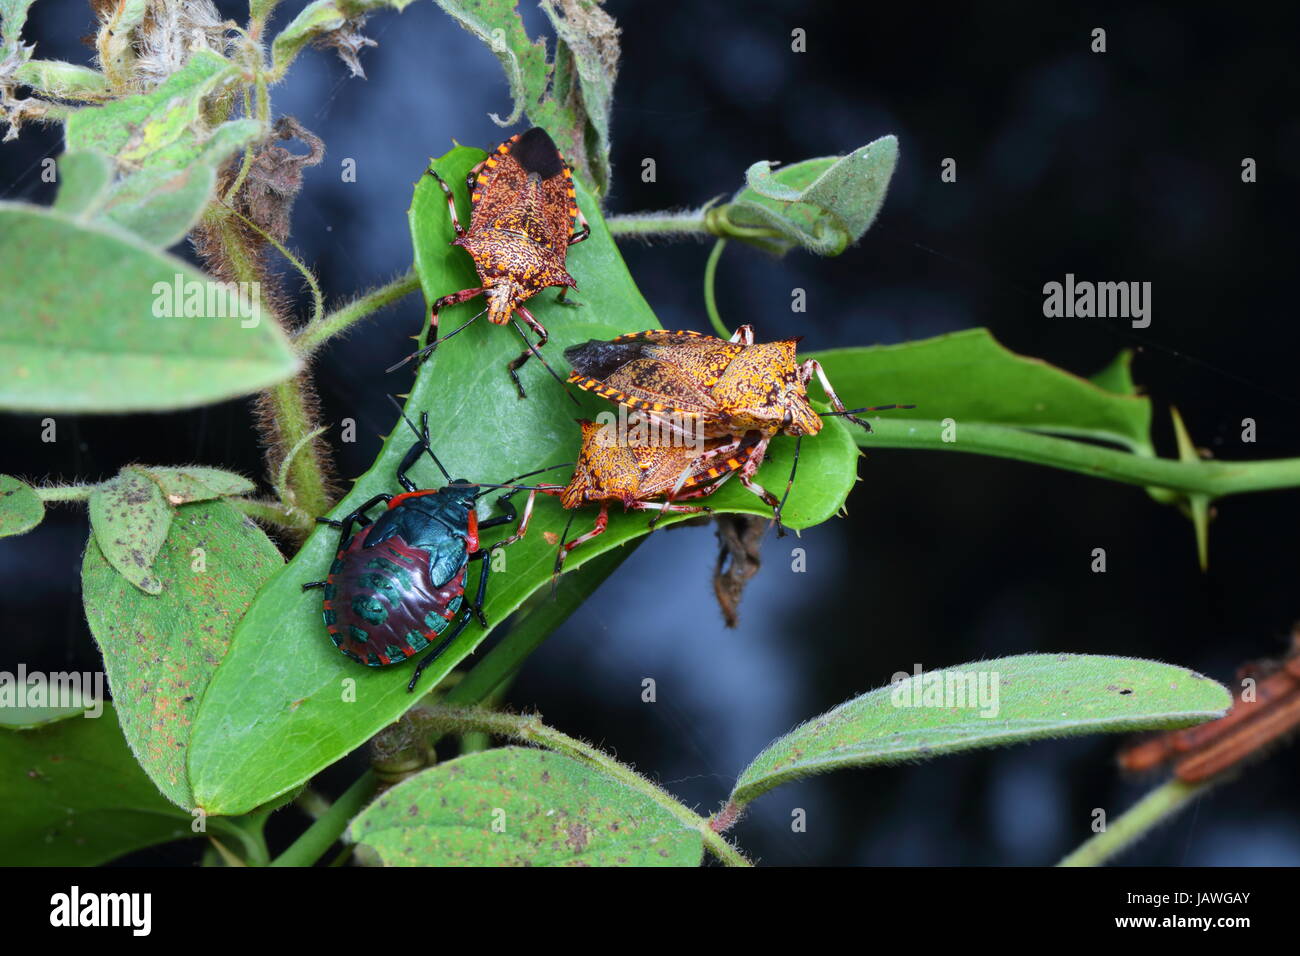 Giant strong nosed stink bugs, Alcaeorrhynchus grandis, adult and last instar nymph resting on a plant. Stock Photo